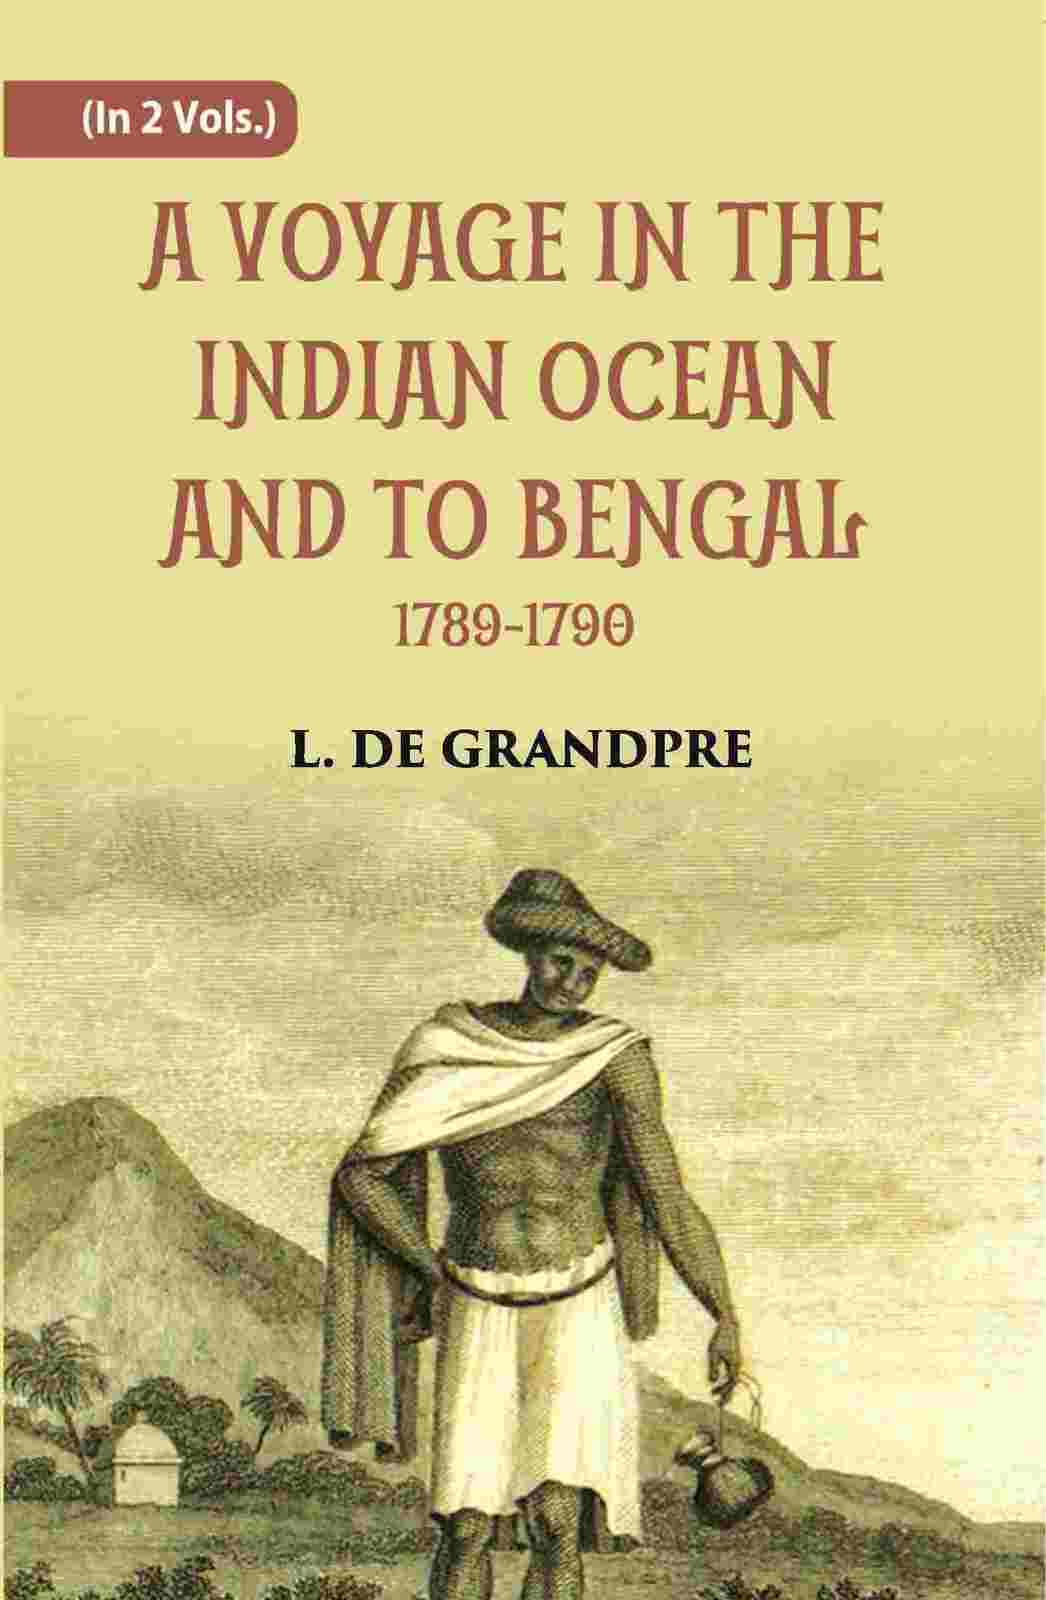 Primary image for A Voyage In The Indian Ocean And To Bengal 1789-1790 Volume 2 Vols.  [Hardcover]